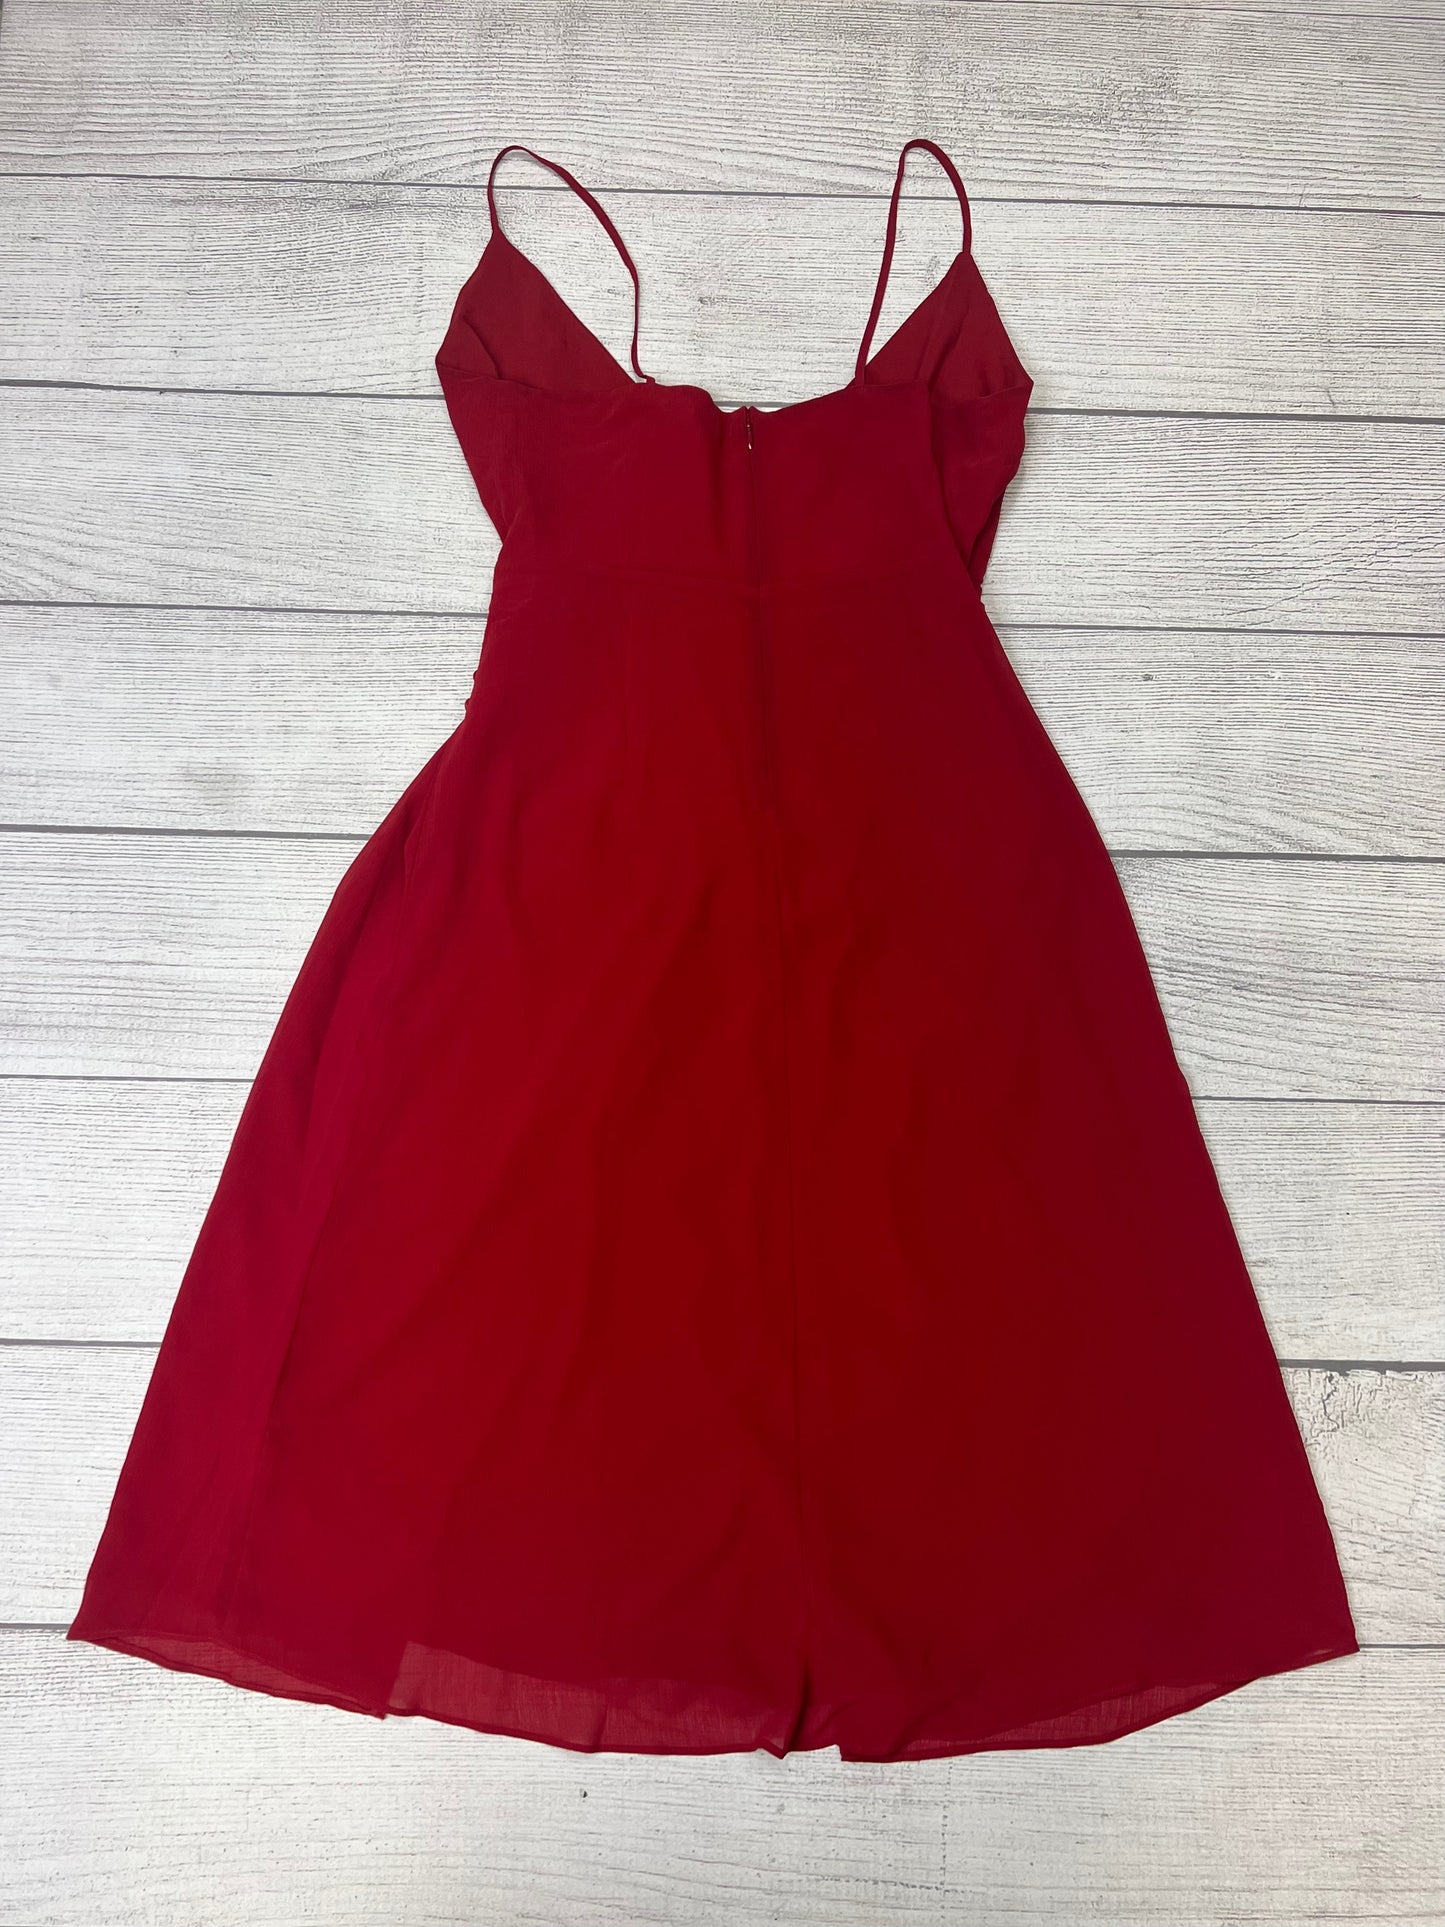 New! Red Dress Casual Midi Madewell, Size S